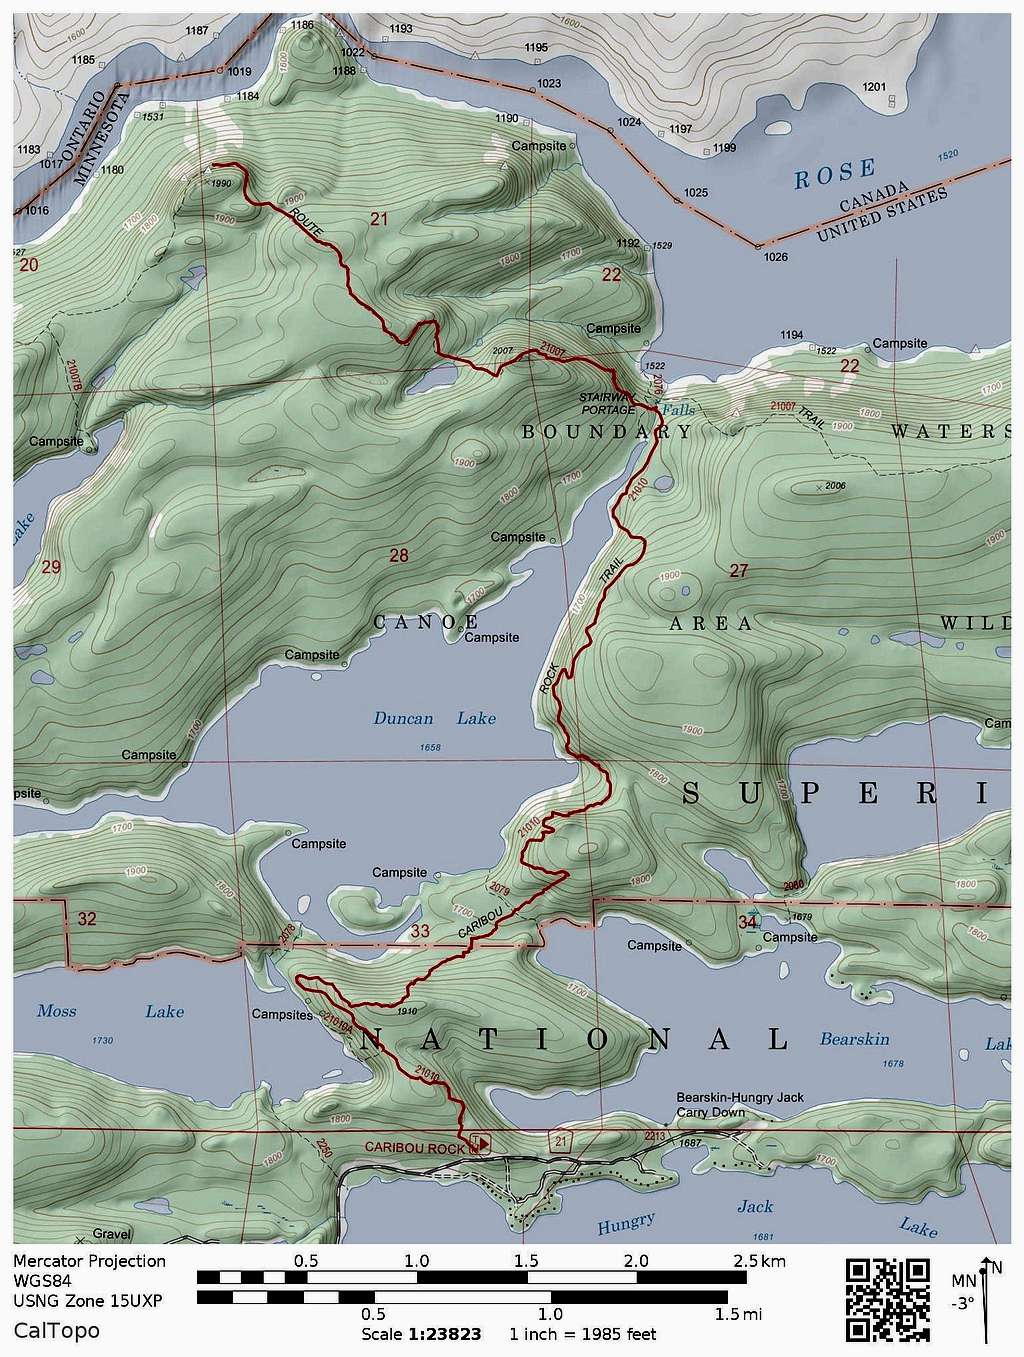 Caribou Rock Trail to Border Route and Rose Cliffs